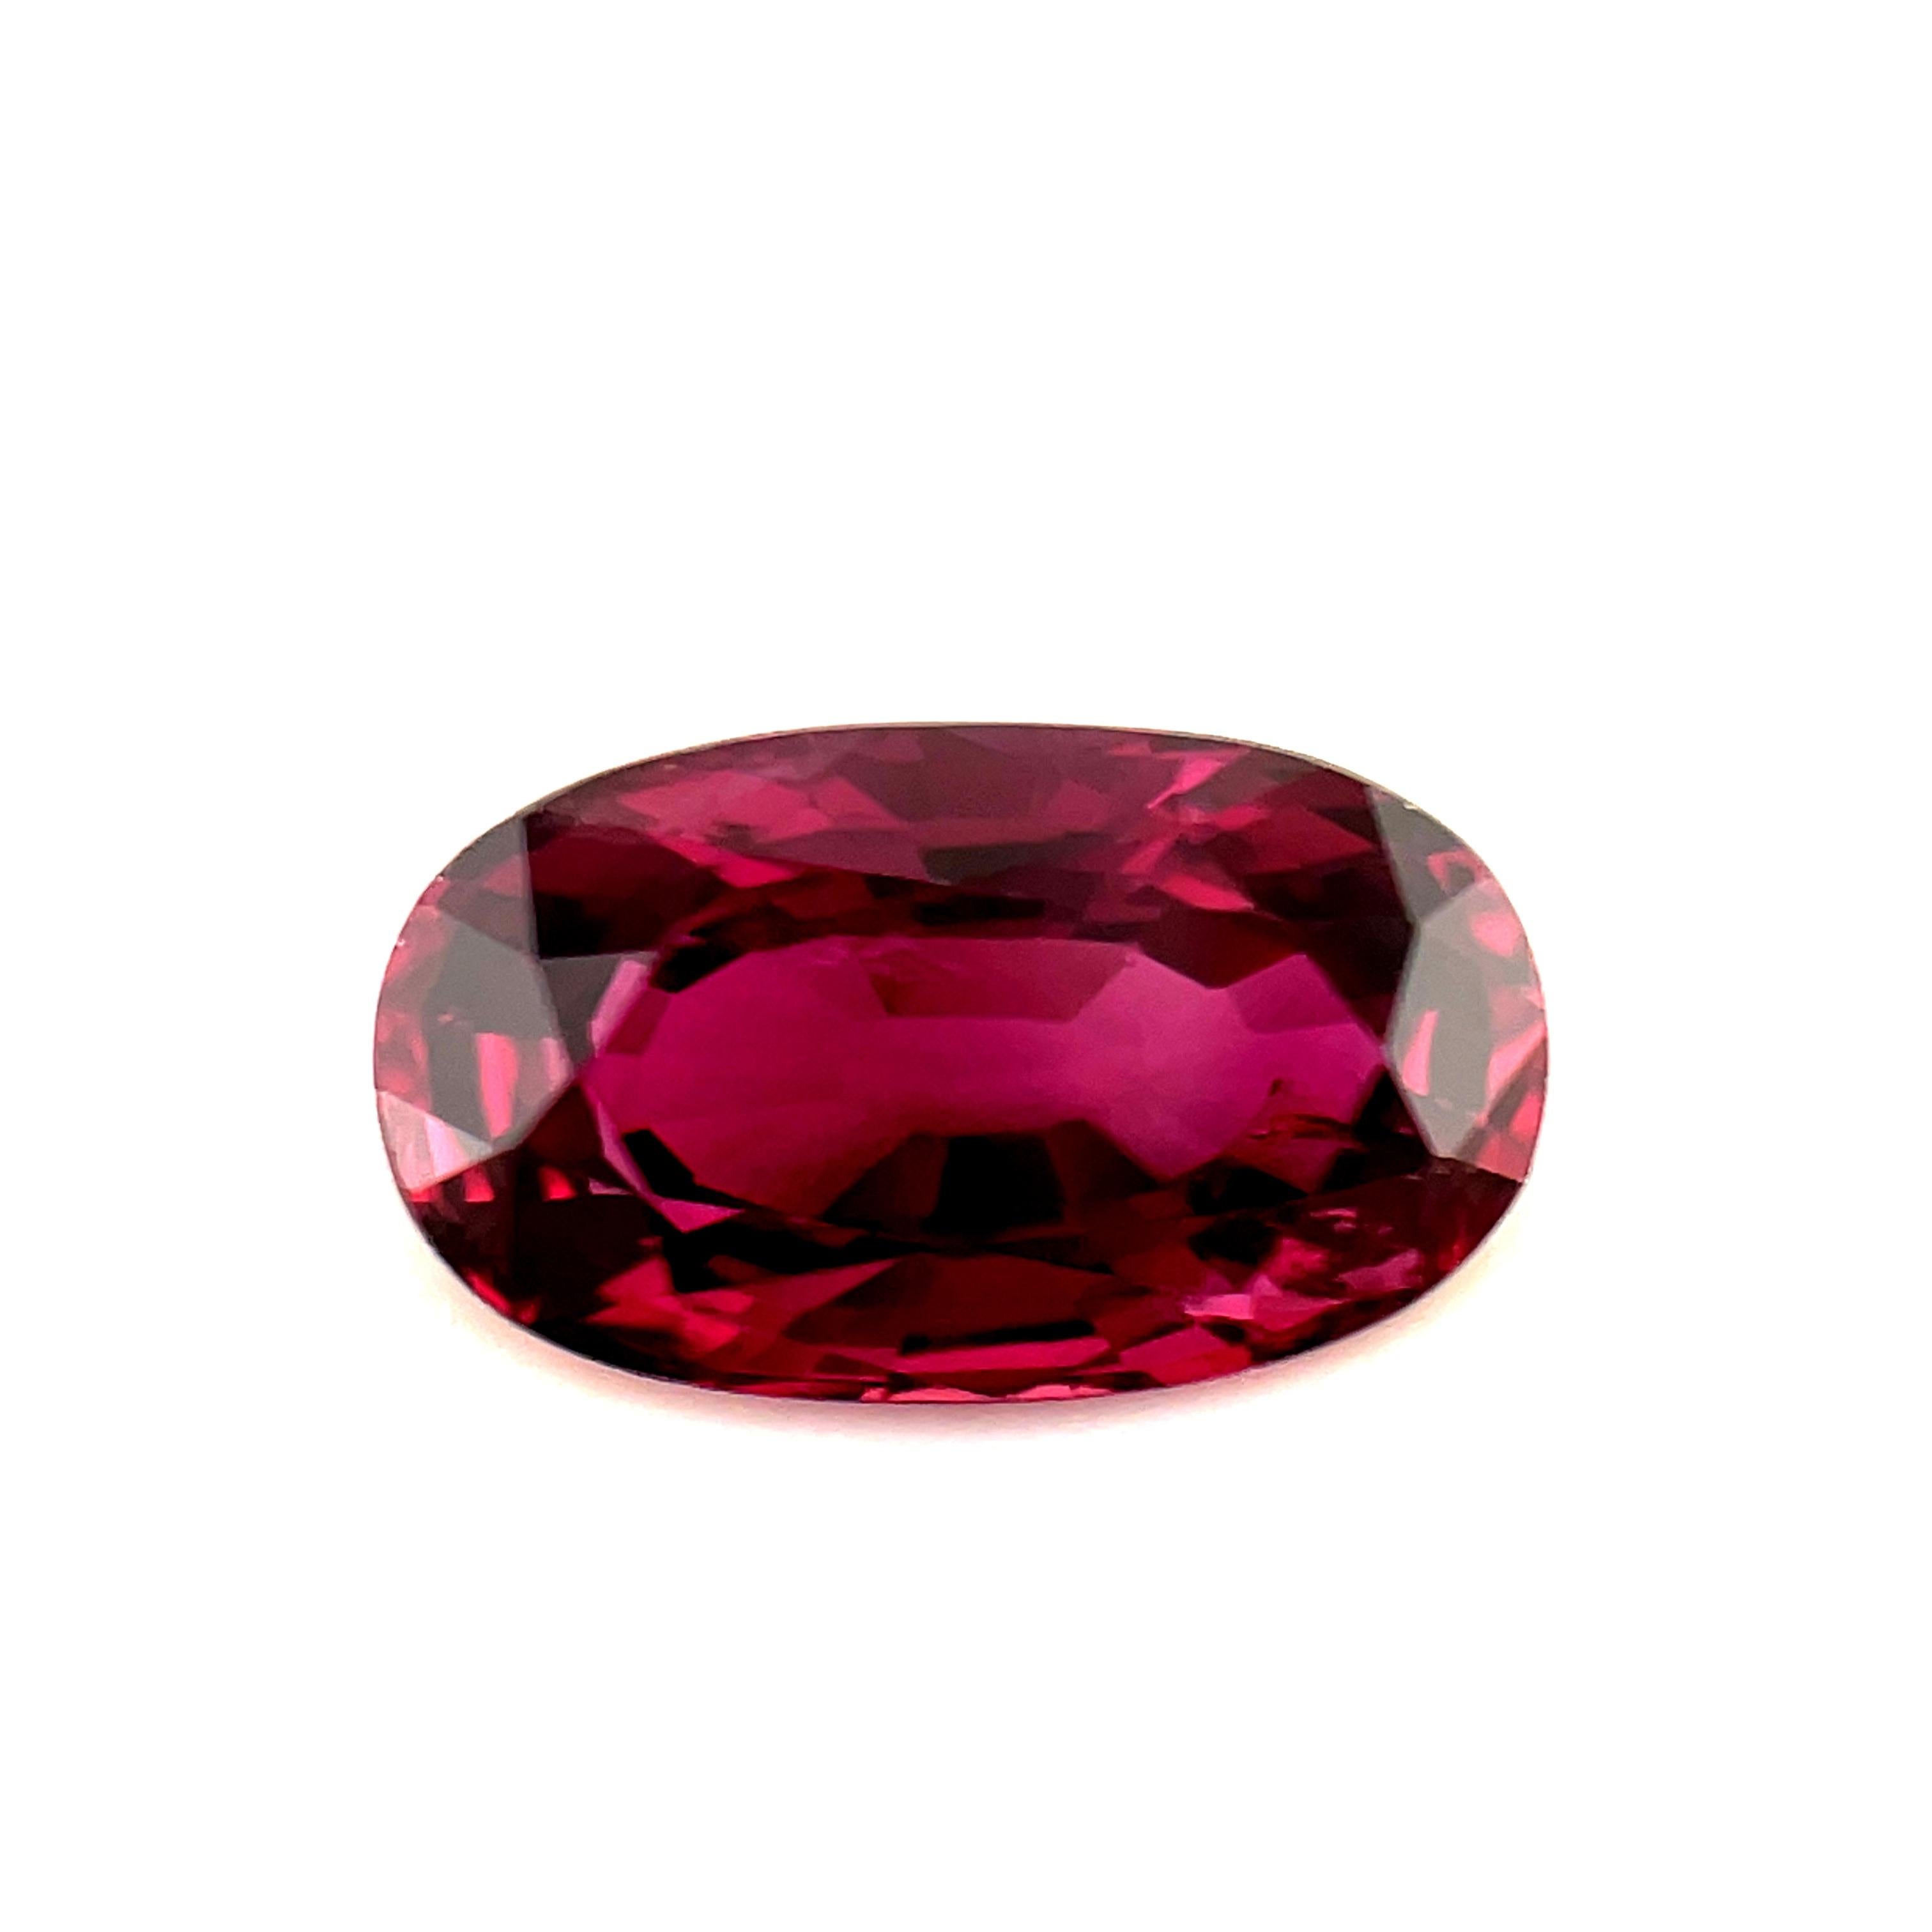 Loose Ruby Gemstone for Engagement or 3-Stone Ring, 1.46 Carat Oval  For Sale 1